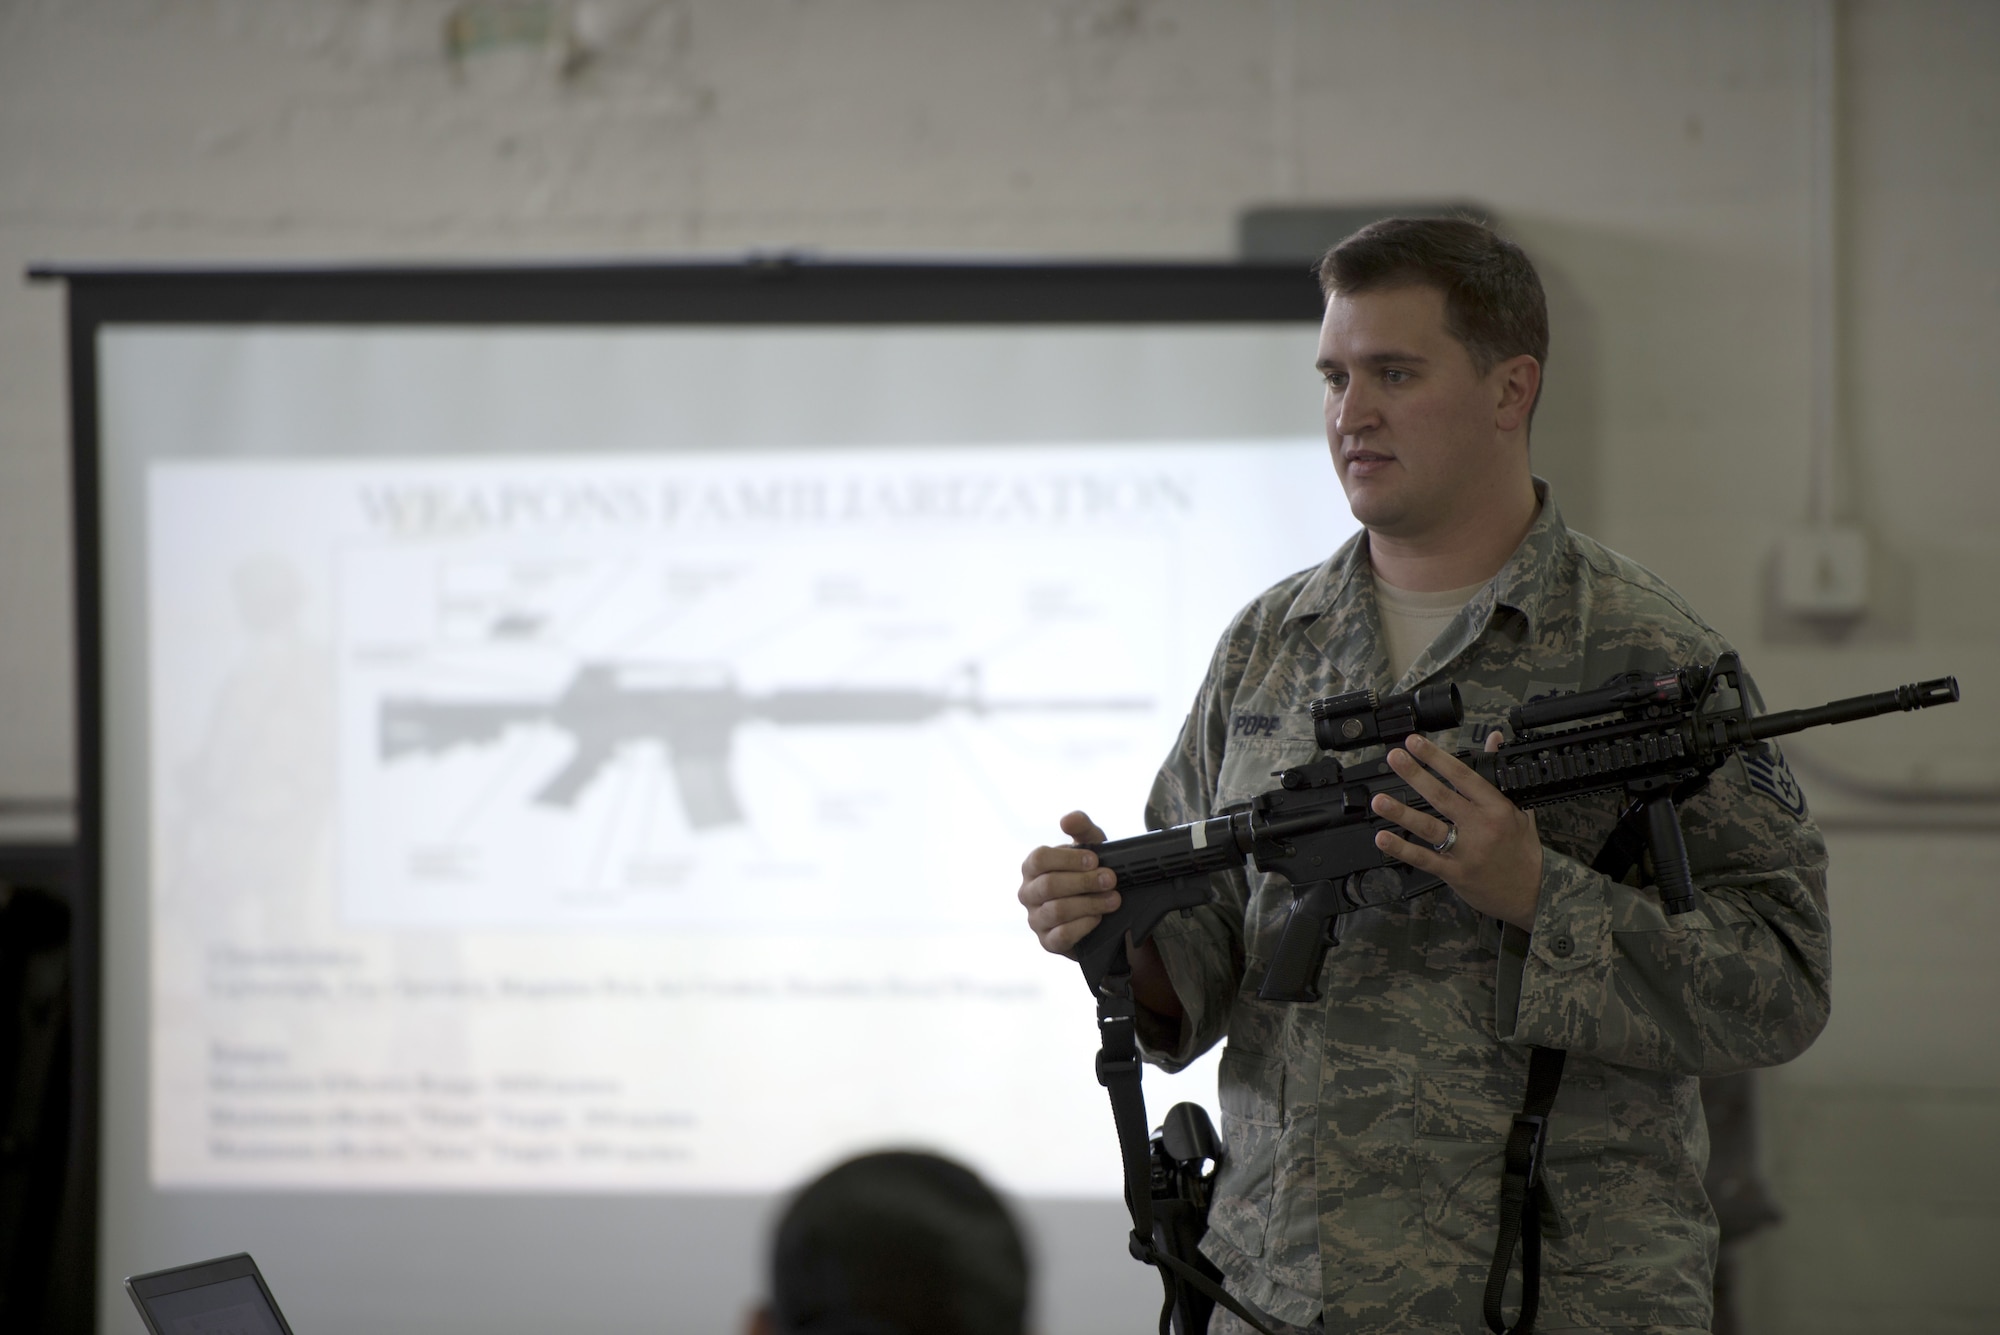 U.S. Air Force Staff Sgt. Charles Pope, a training instructor assigned to the 6th Security Forces Squadron, explains the parts of an M-4 carbine during the integrated base defense portion of Ability to Survive and Operate (ATSO) training at MacDill Air Force Base, Fla., Jan 28, 2018.